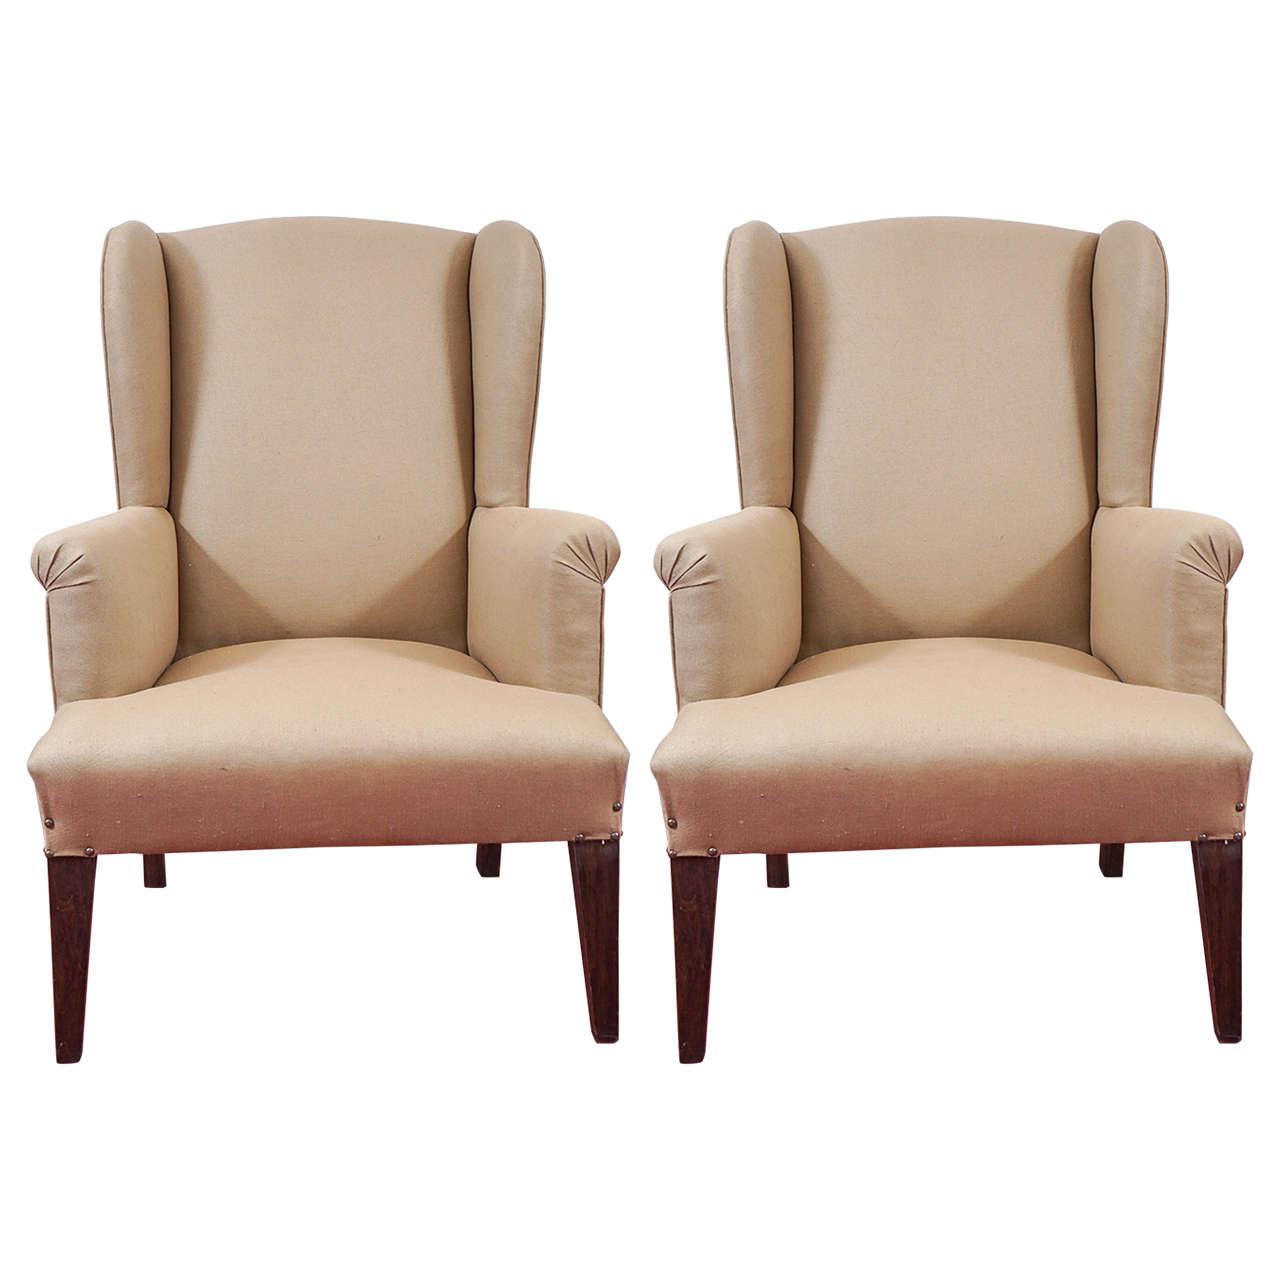 Pair of linen wingback chairs, 1970s